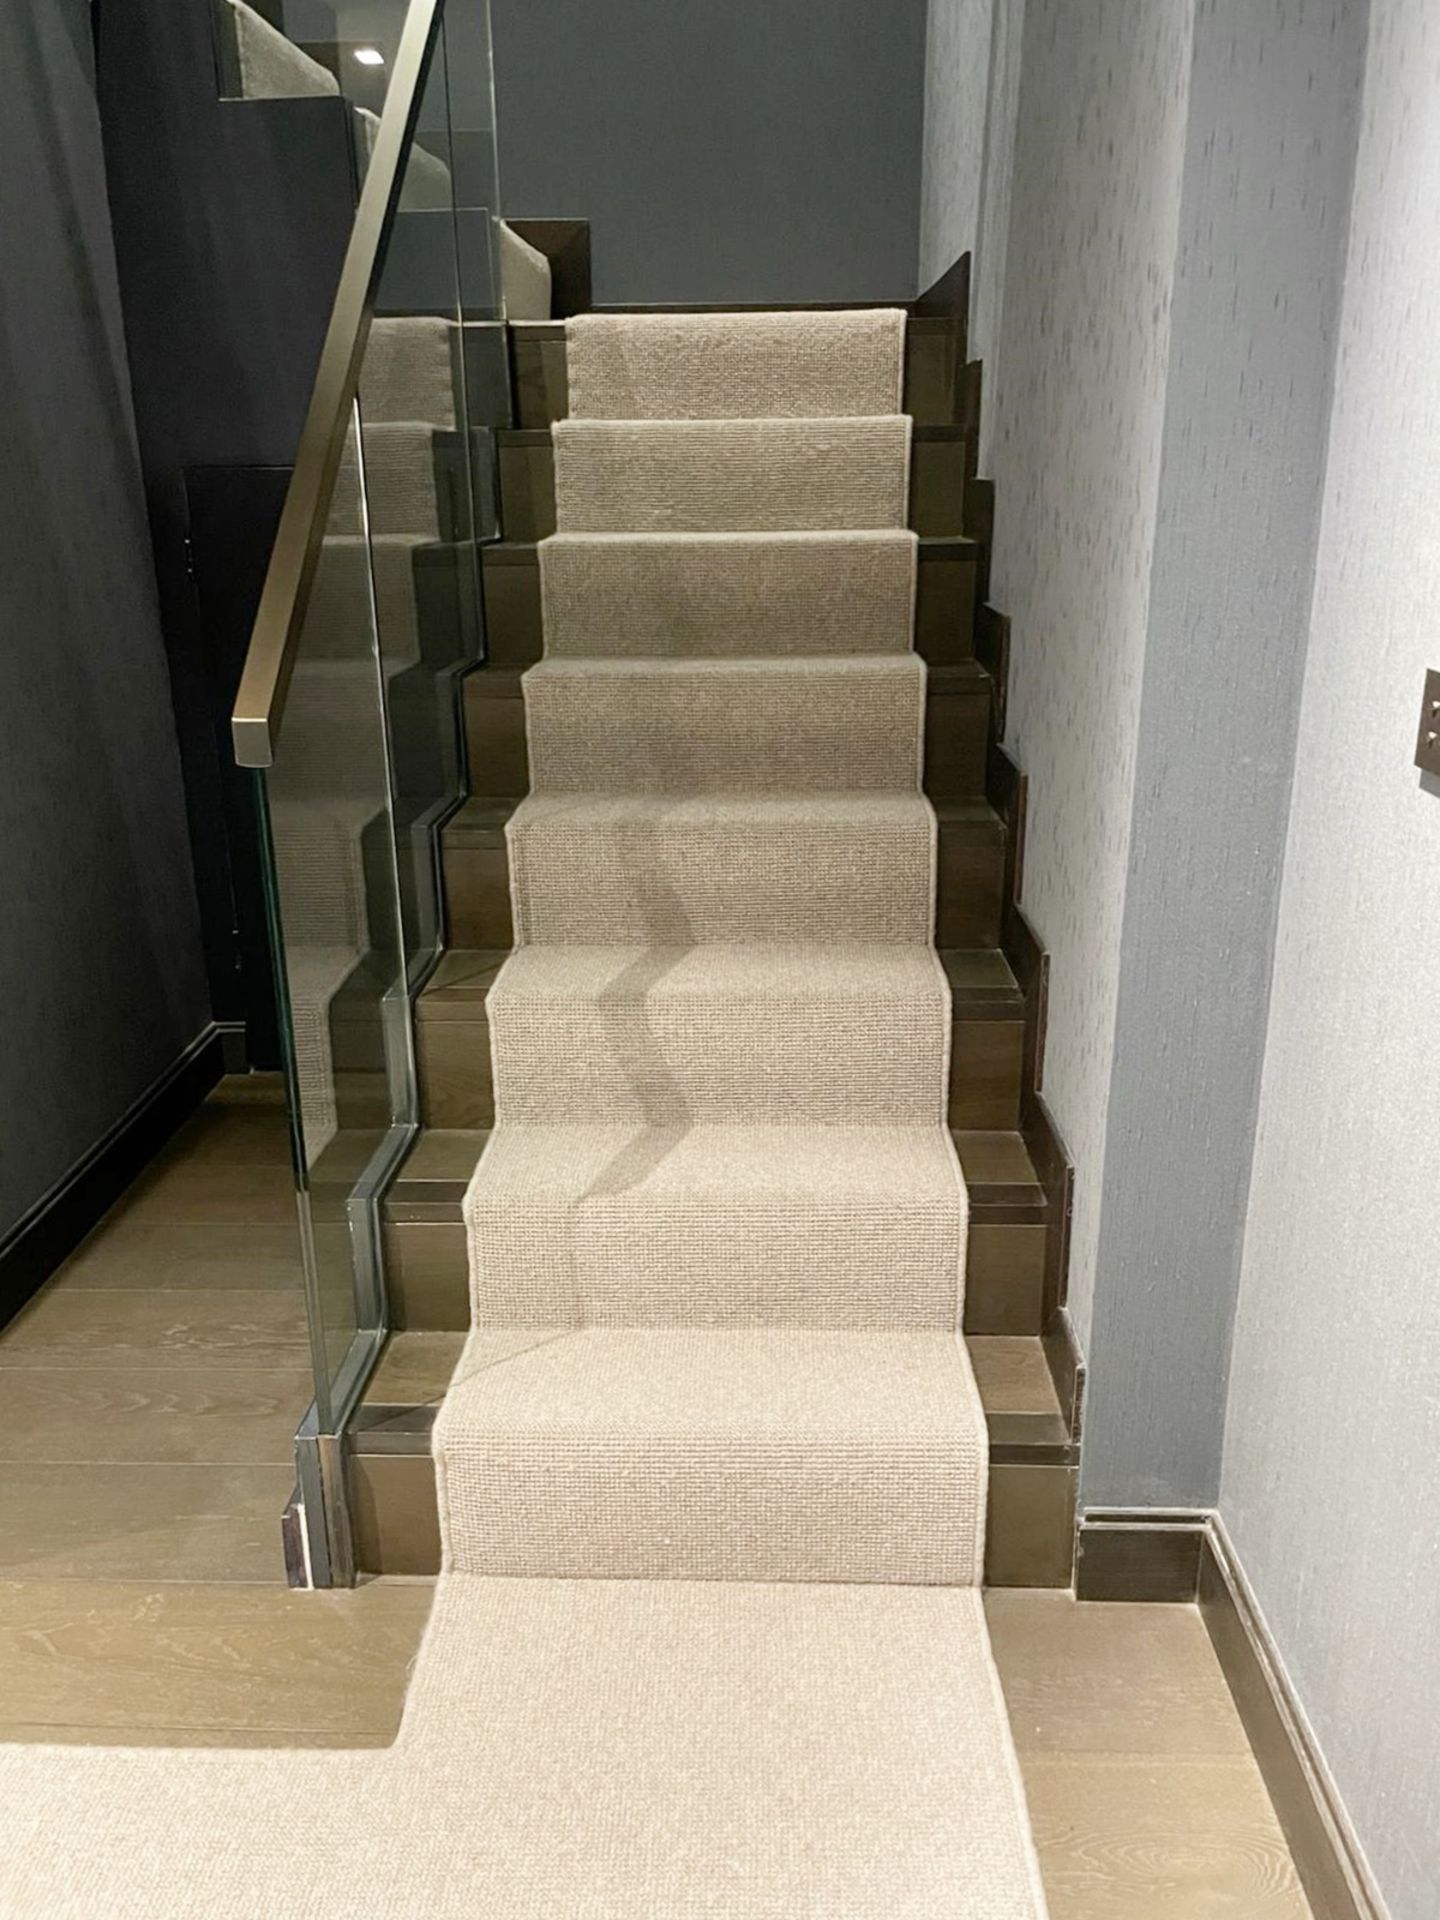 3 x Sections of Premium Woven Stairway Carpets in a Neutral Tone - CL894 - NO VAT ON THE HAMMER - Image 2 of 14